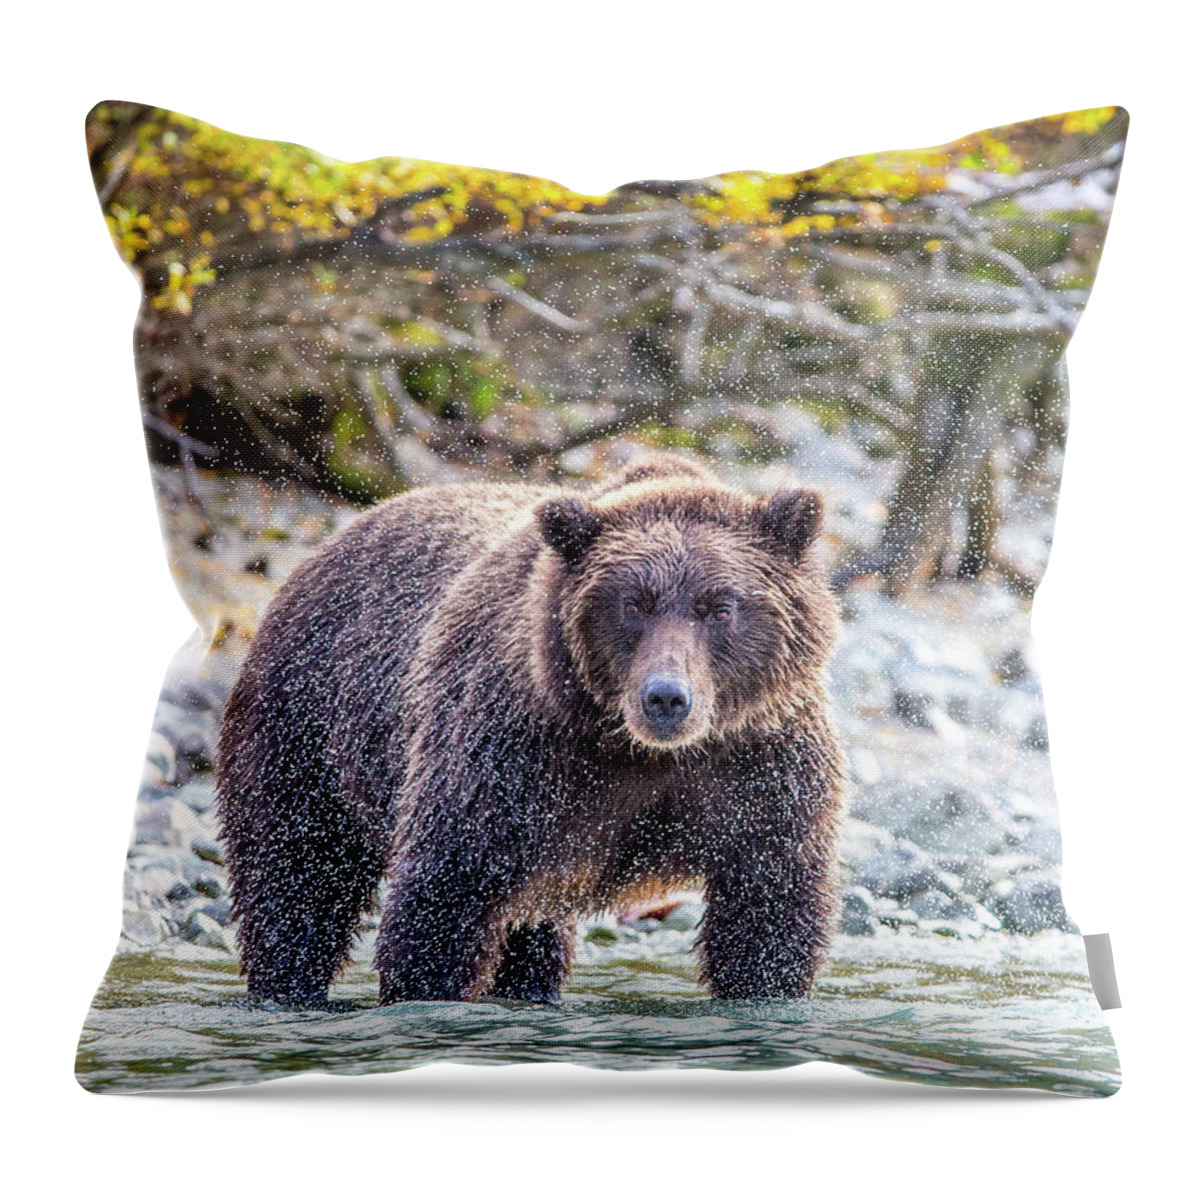 Alaska Throw Pillow featuring the photograph Frozen Shake by Kevin Dietrich